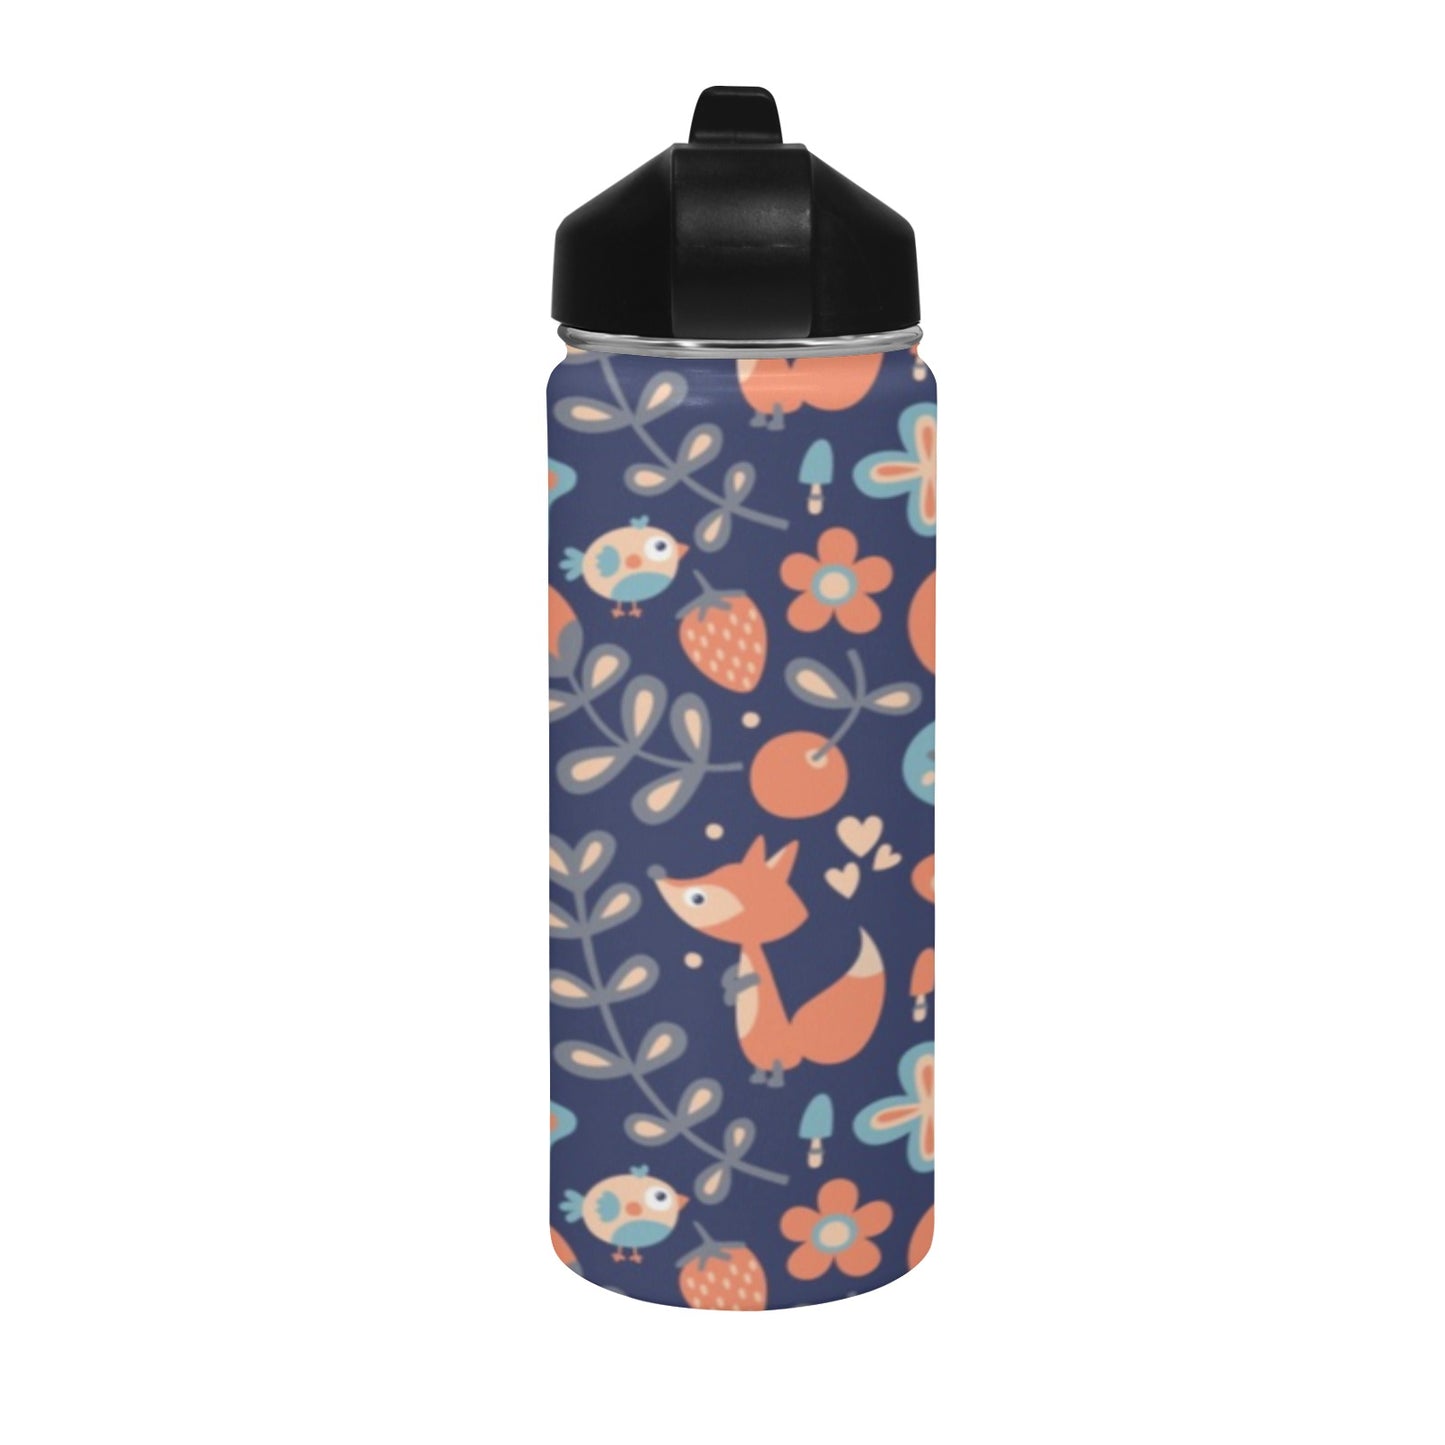 Cute Fox Insulated Water Bottle with Straw Lid (18 oz) Insulated Water Bottle with Straw Lid